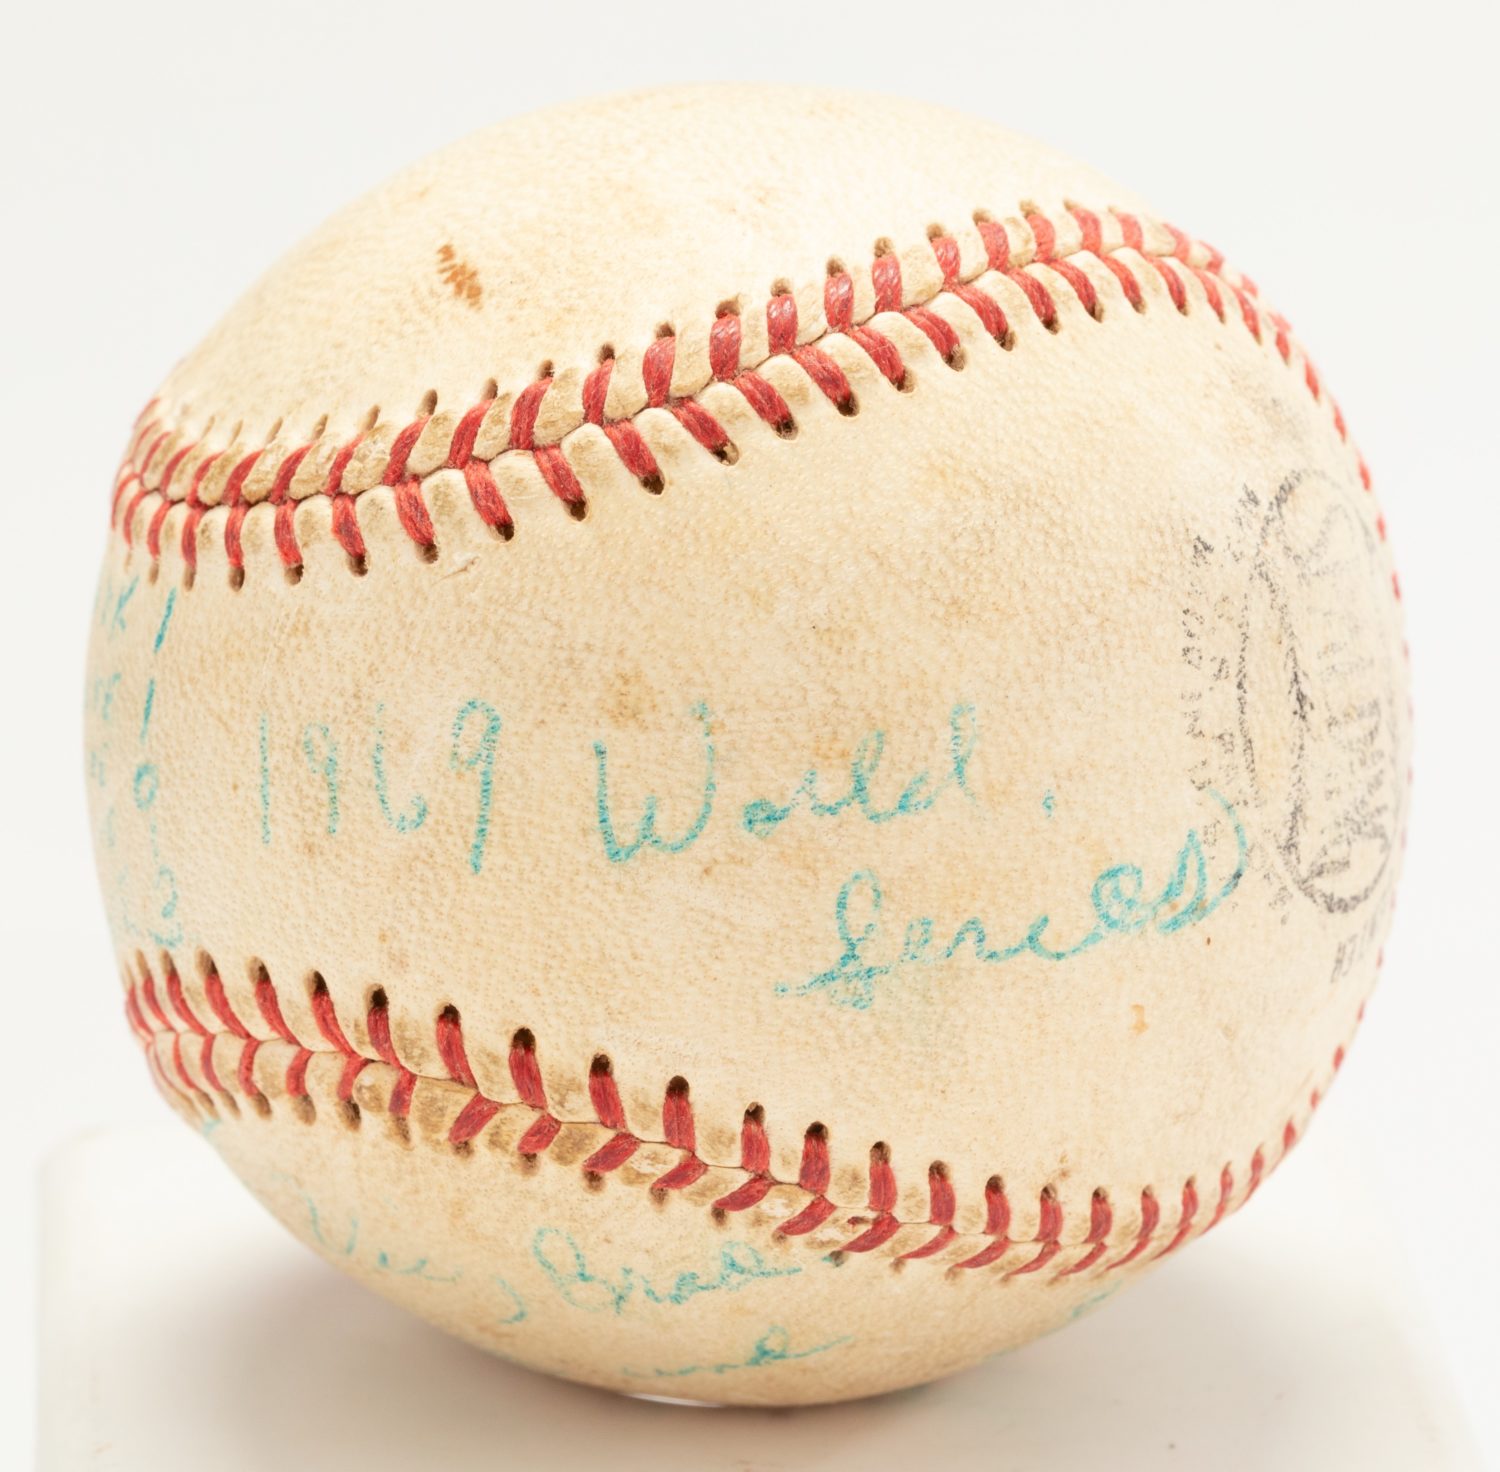 Umpire Lee Meyer's World Series Game-Used Ball